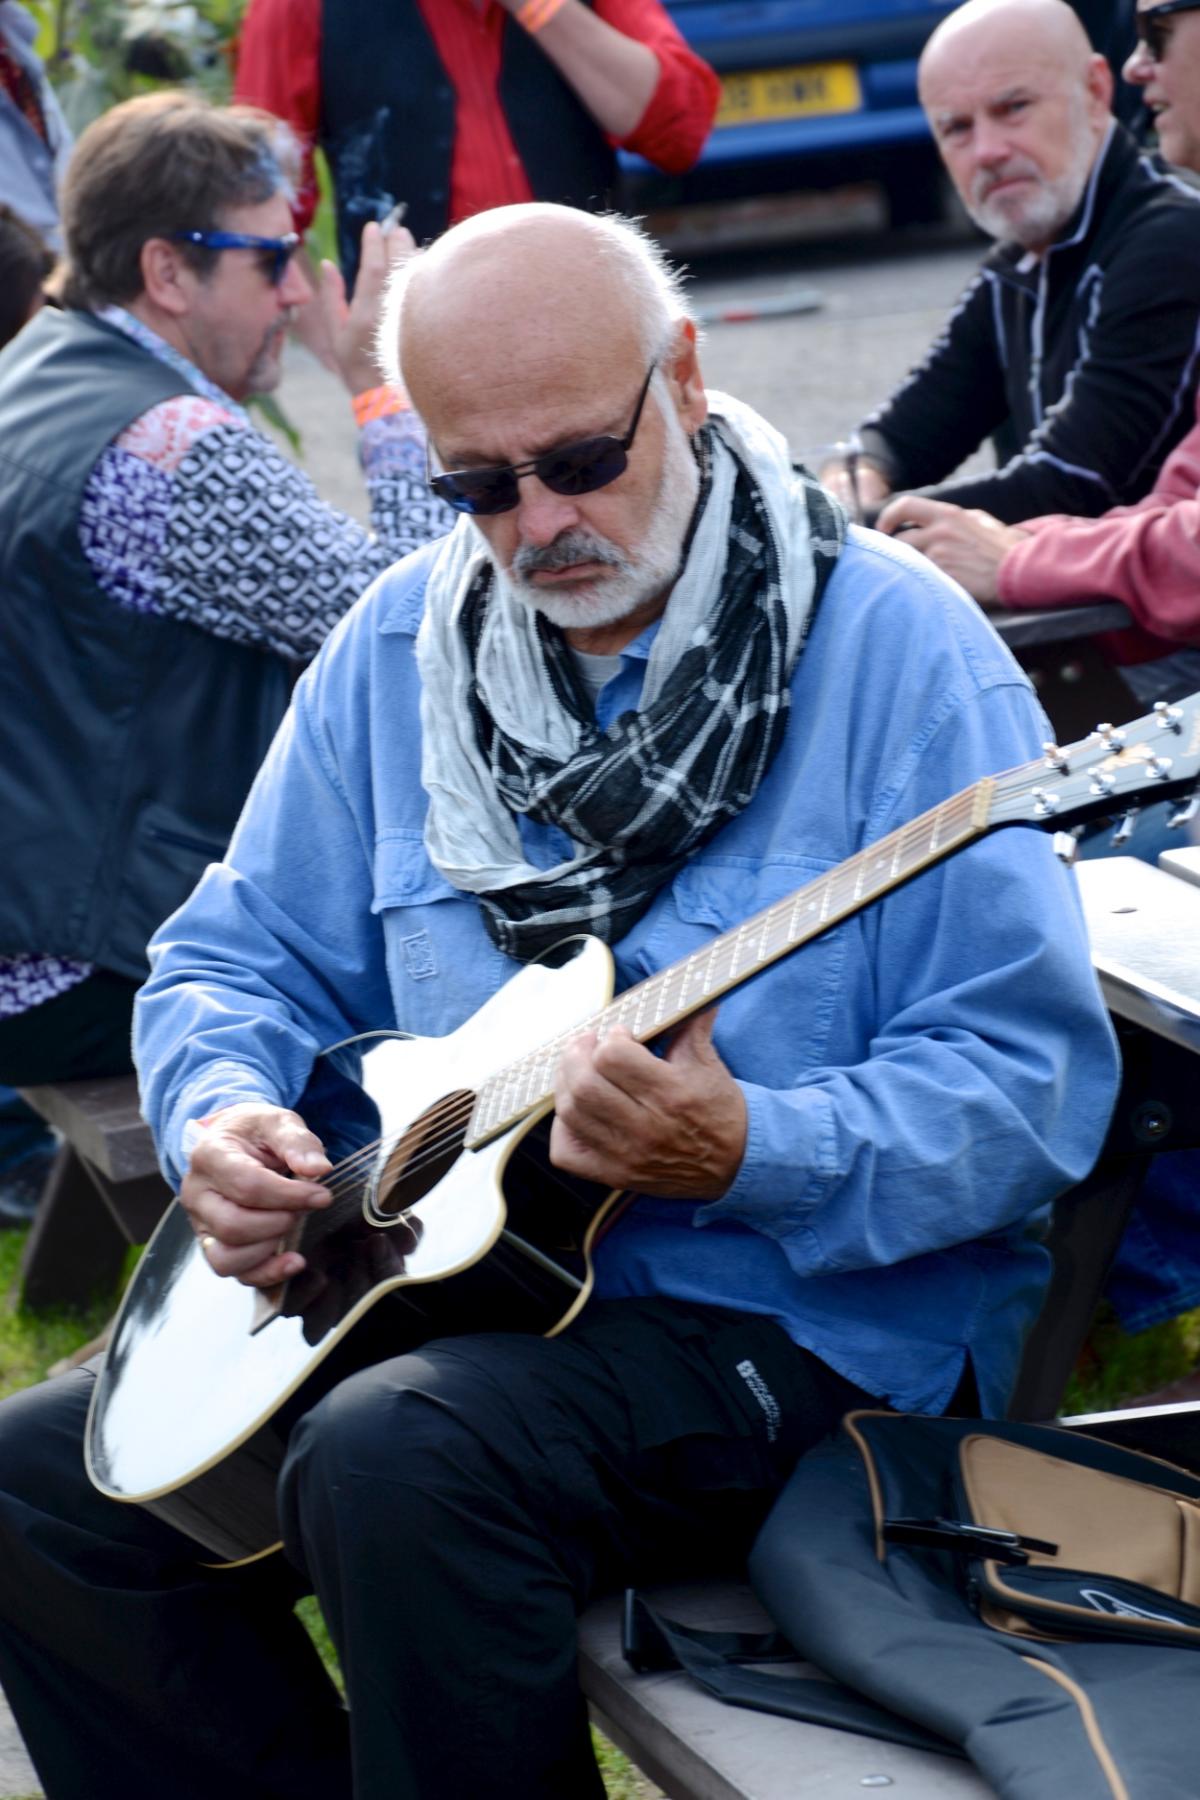 Swanage Blues Festival 2015. Pictures by Sian Court